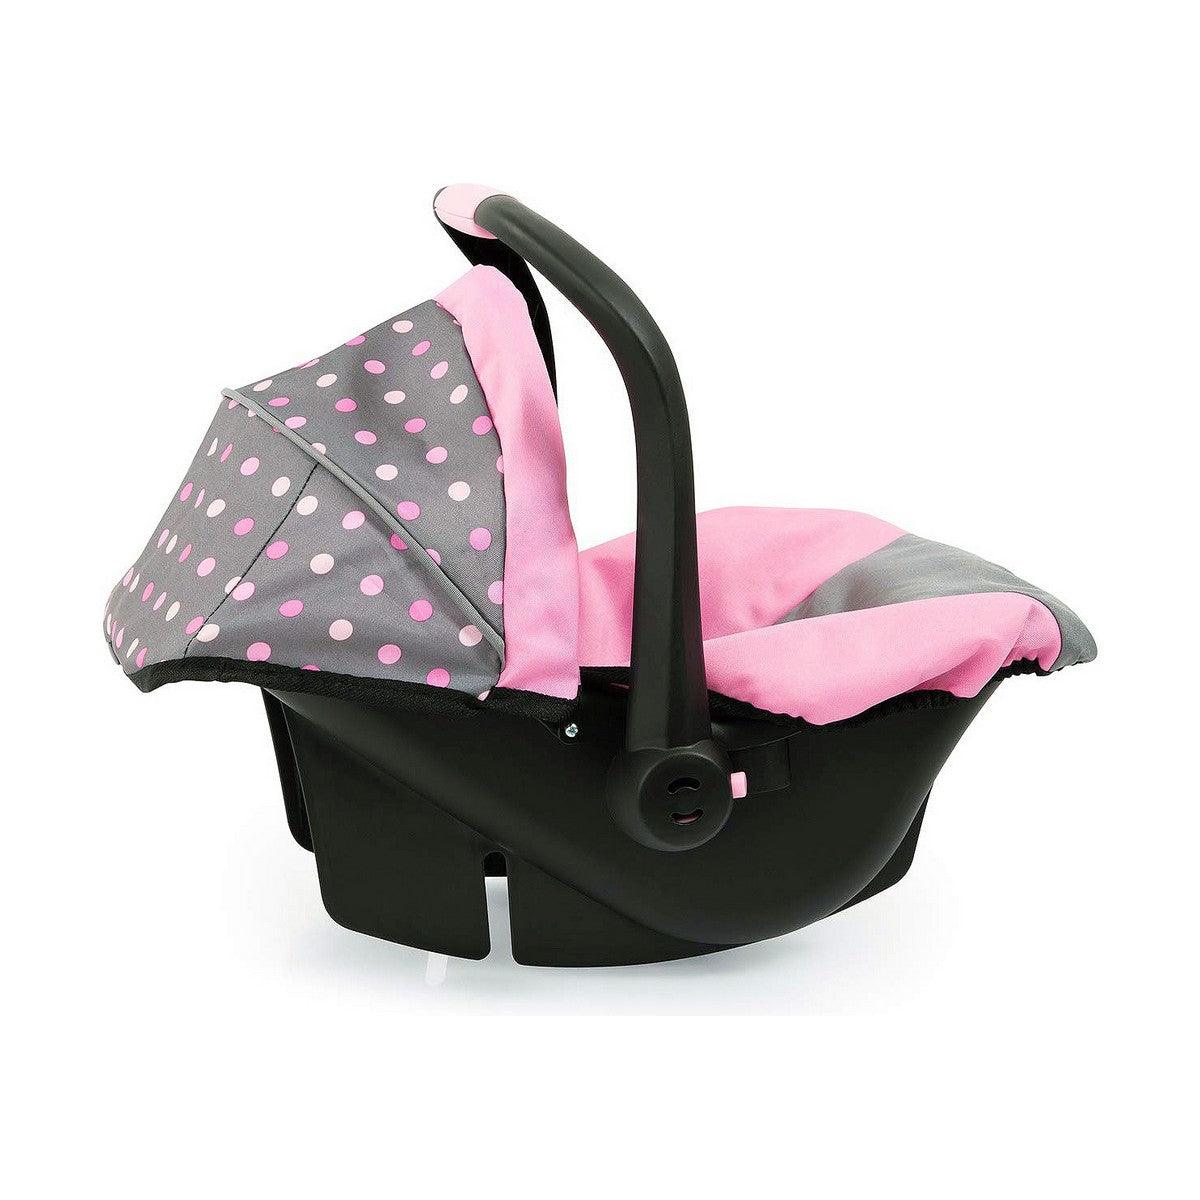 Chair for Dolls Reig Deluxe Grey Car Pink - VirtuousWares:Global